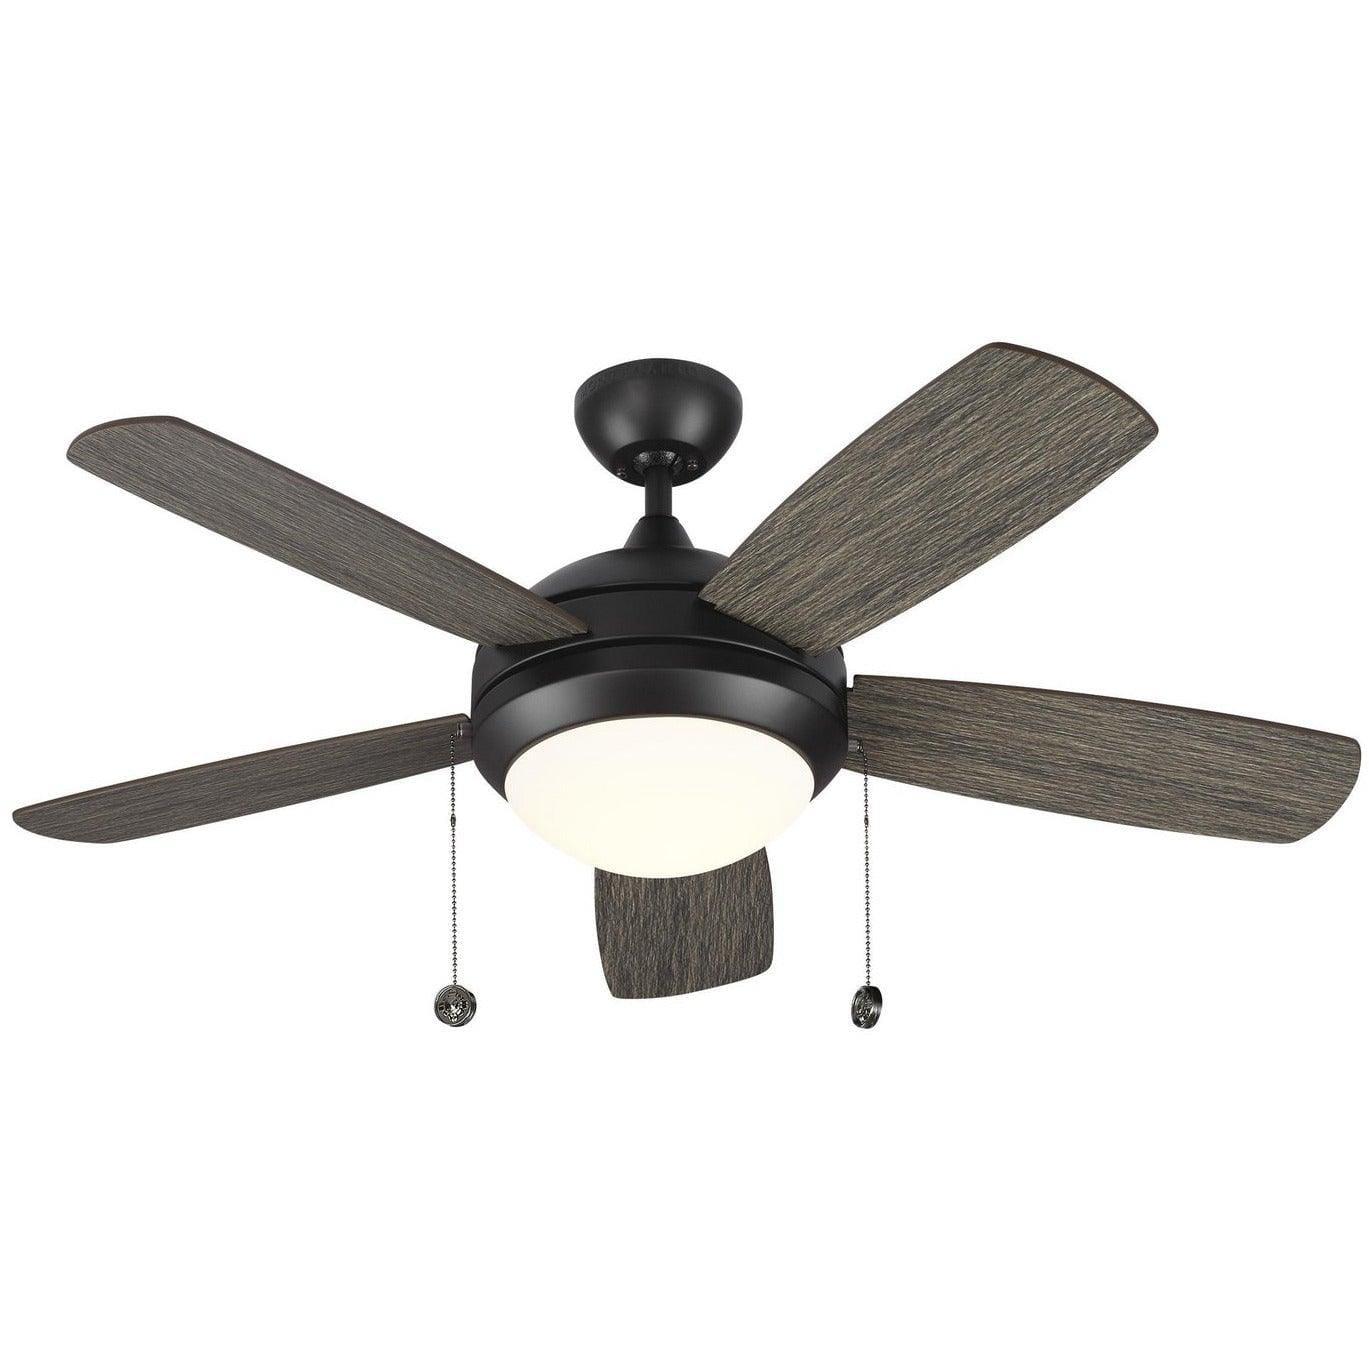 Visual Comfort Fan Collection - Discus Classic II 44" Ceiling Fan - 5DIC44AGPD-V1 | Montreal Lighting & Hardware